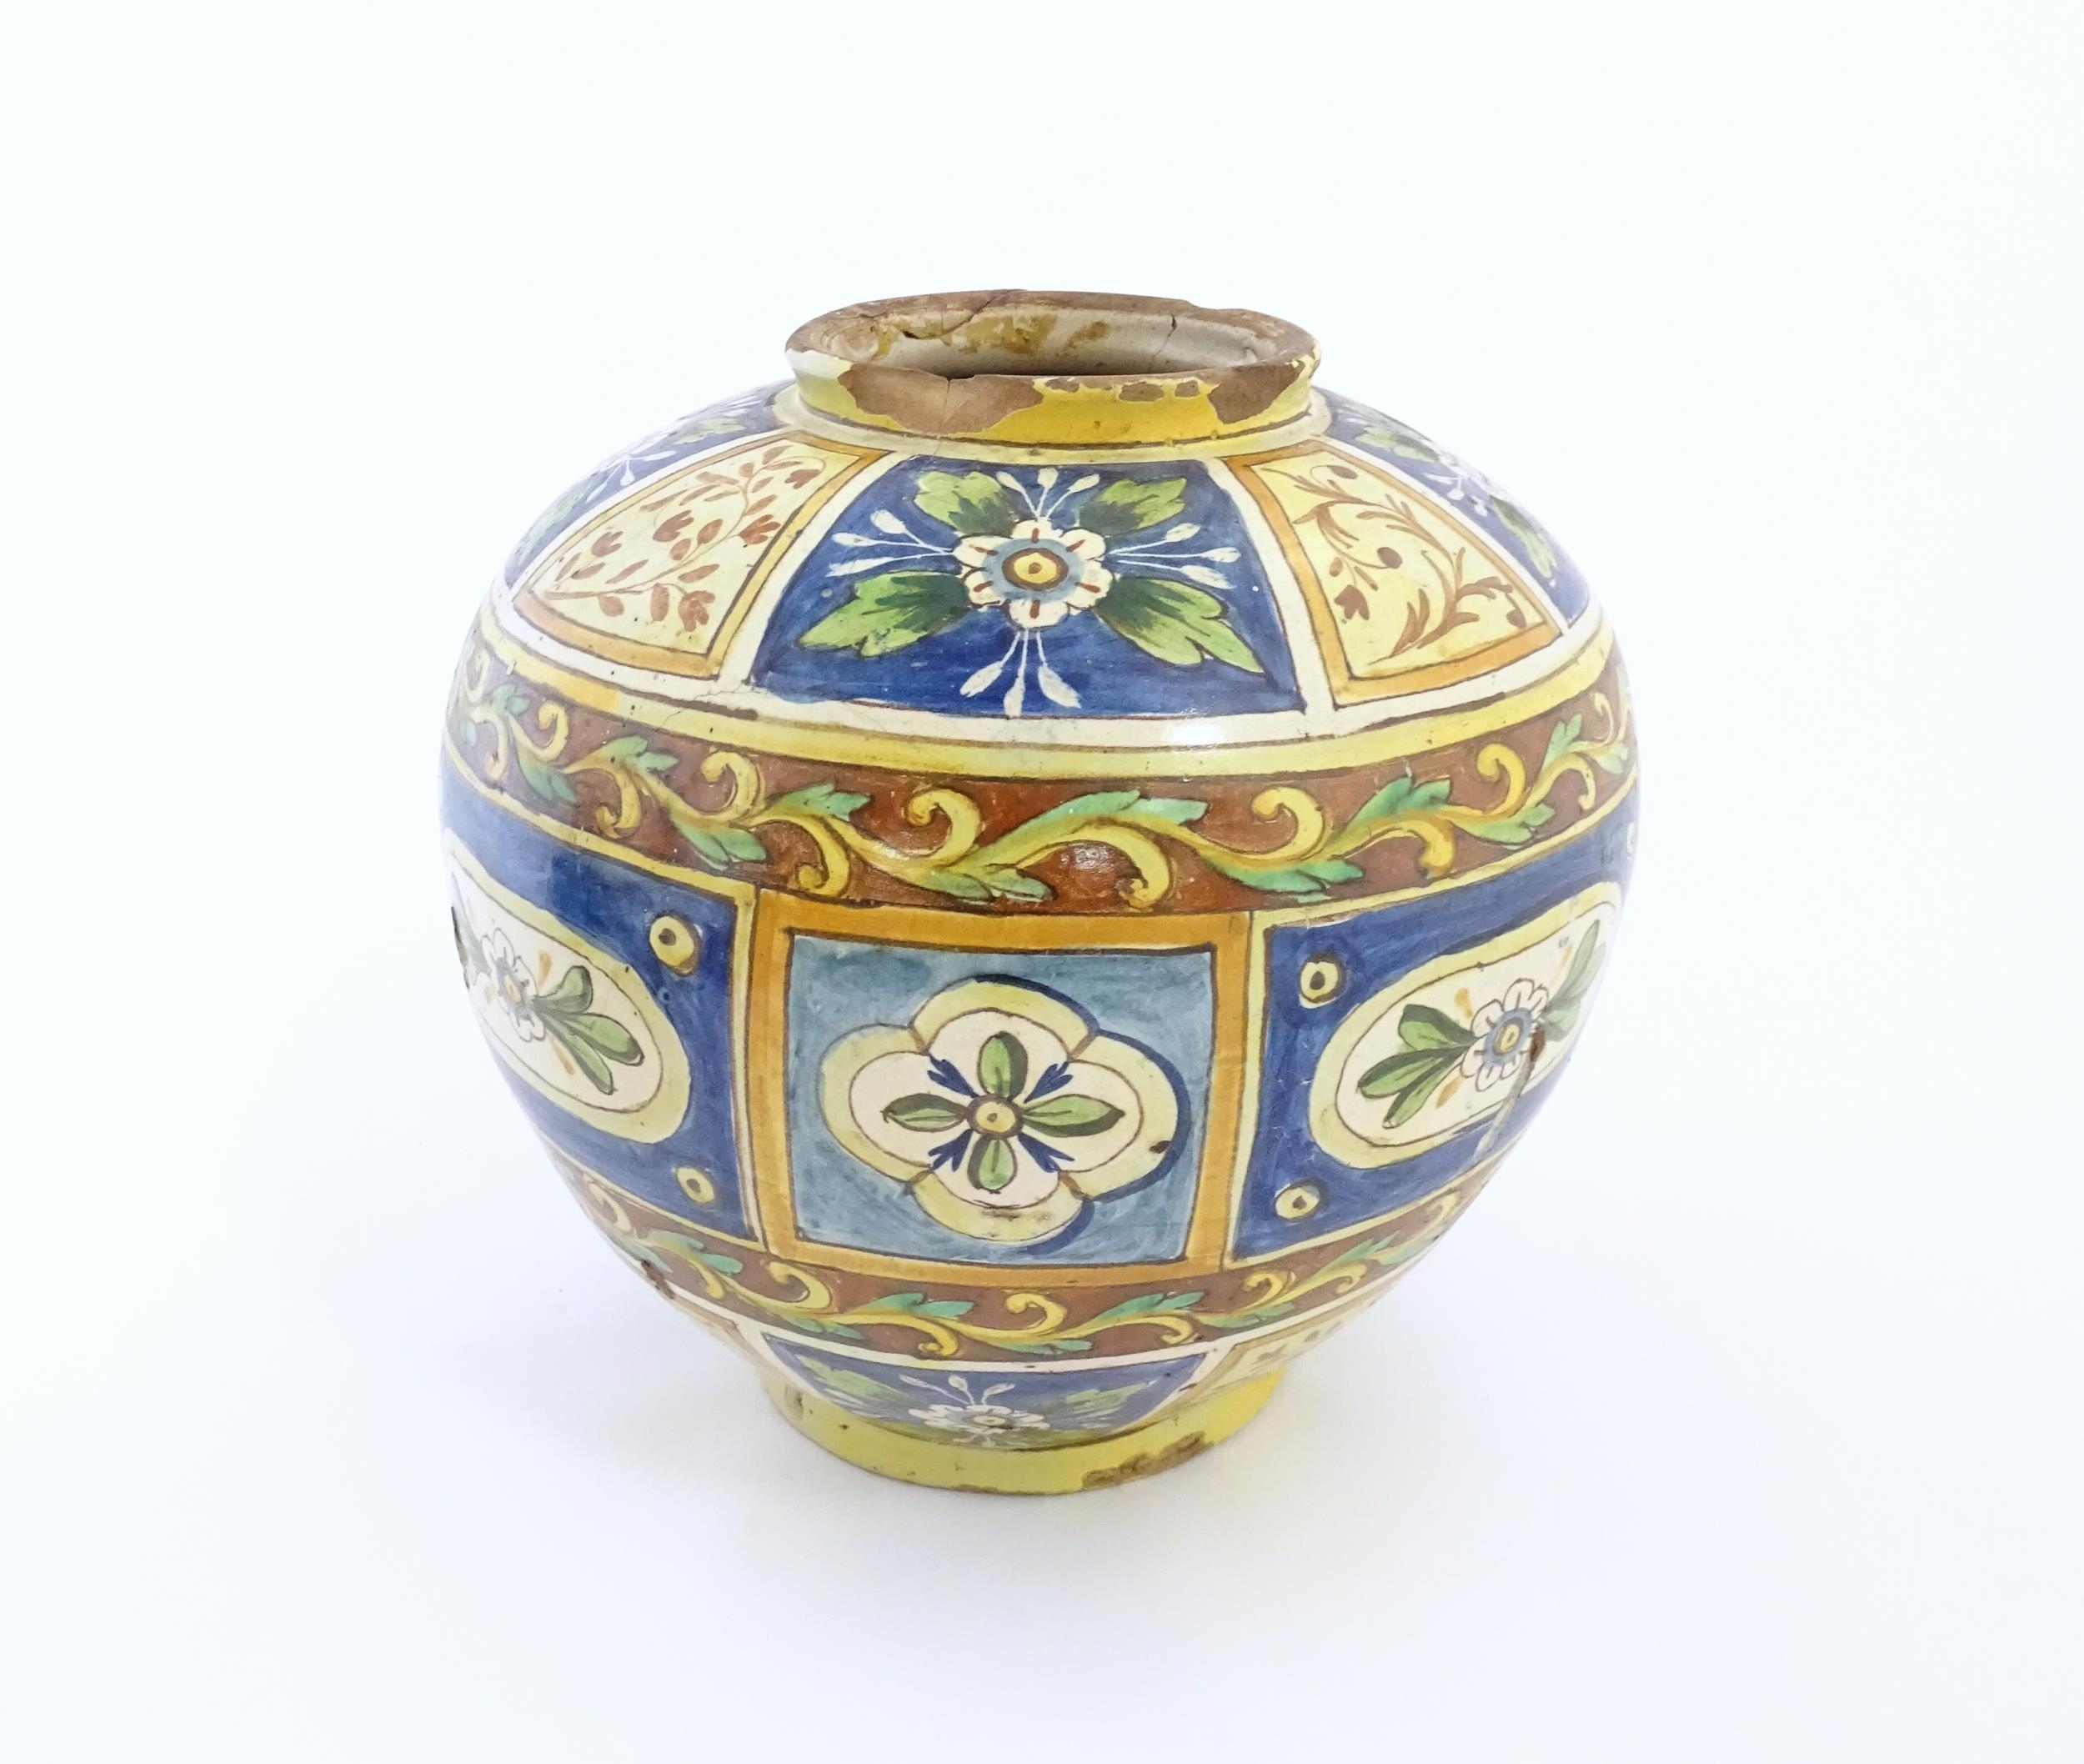 A Sicilian maiolica Bombola vase with panelled and banded decoration depicting flowers and - Image 8 of 10